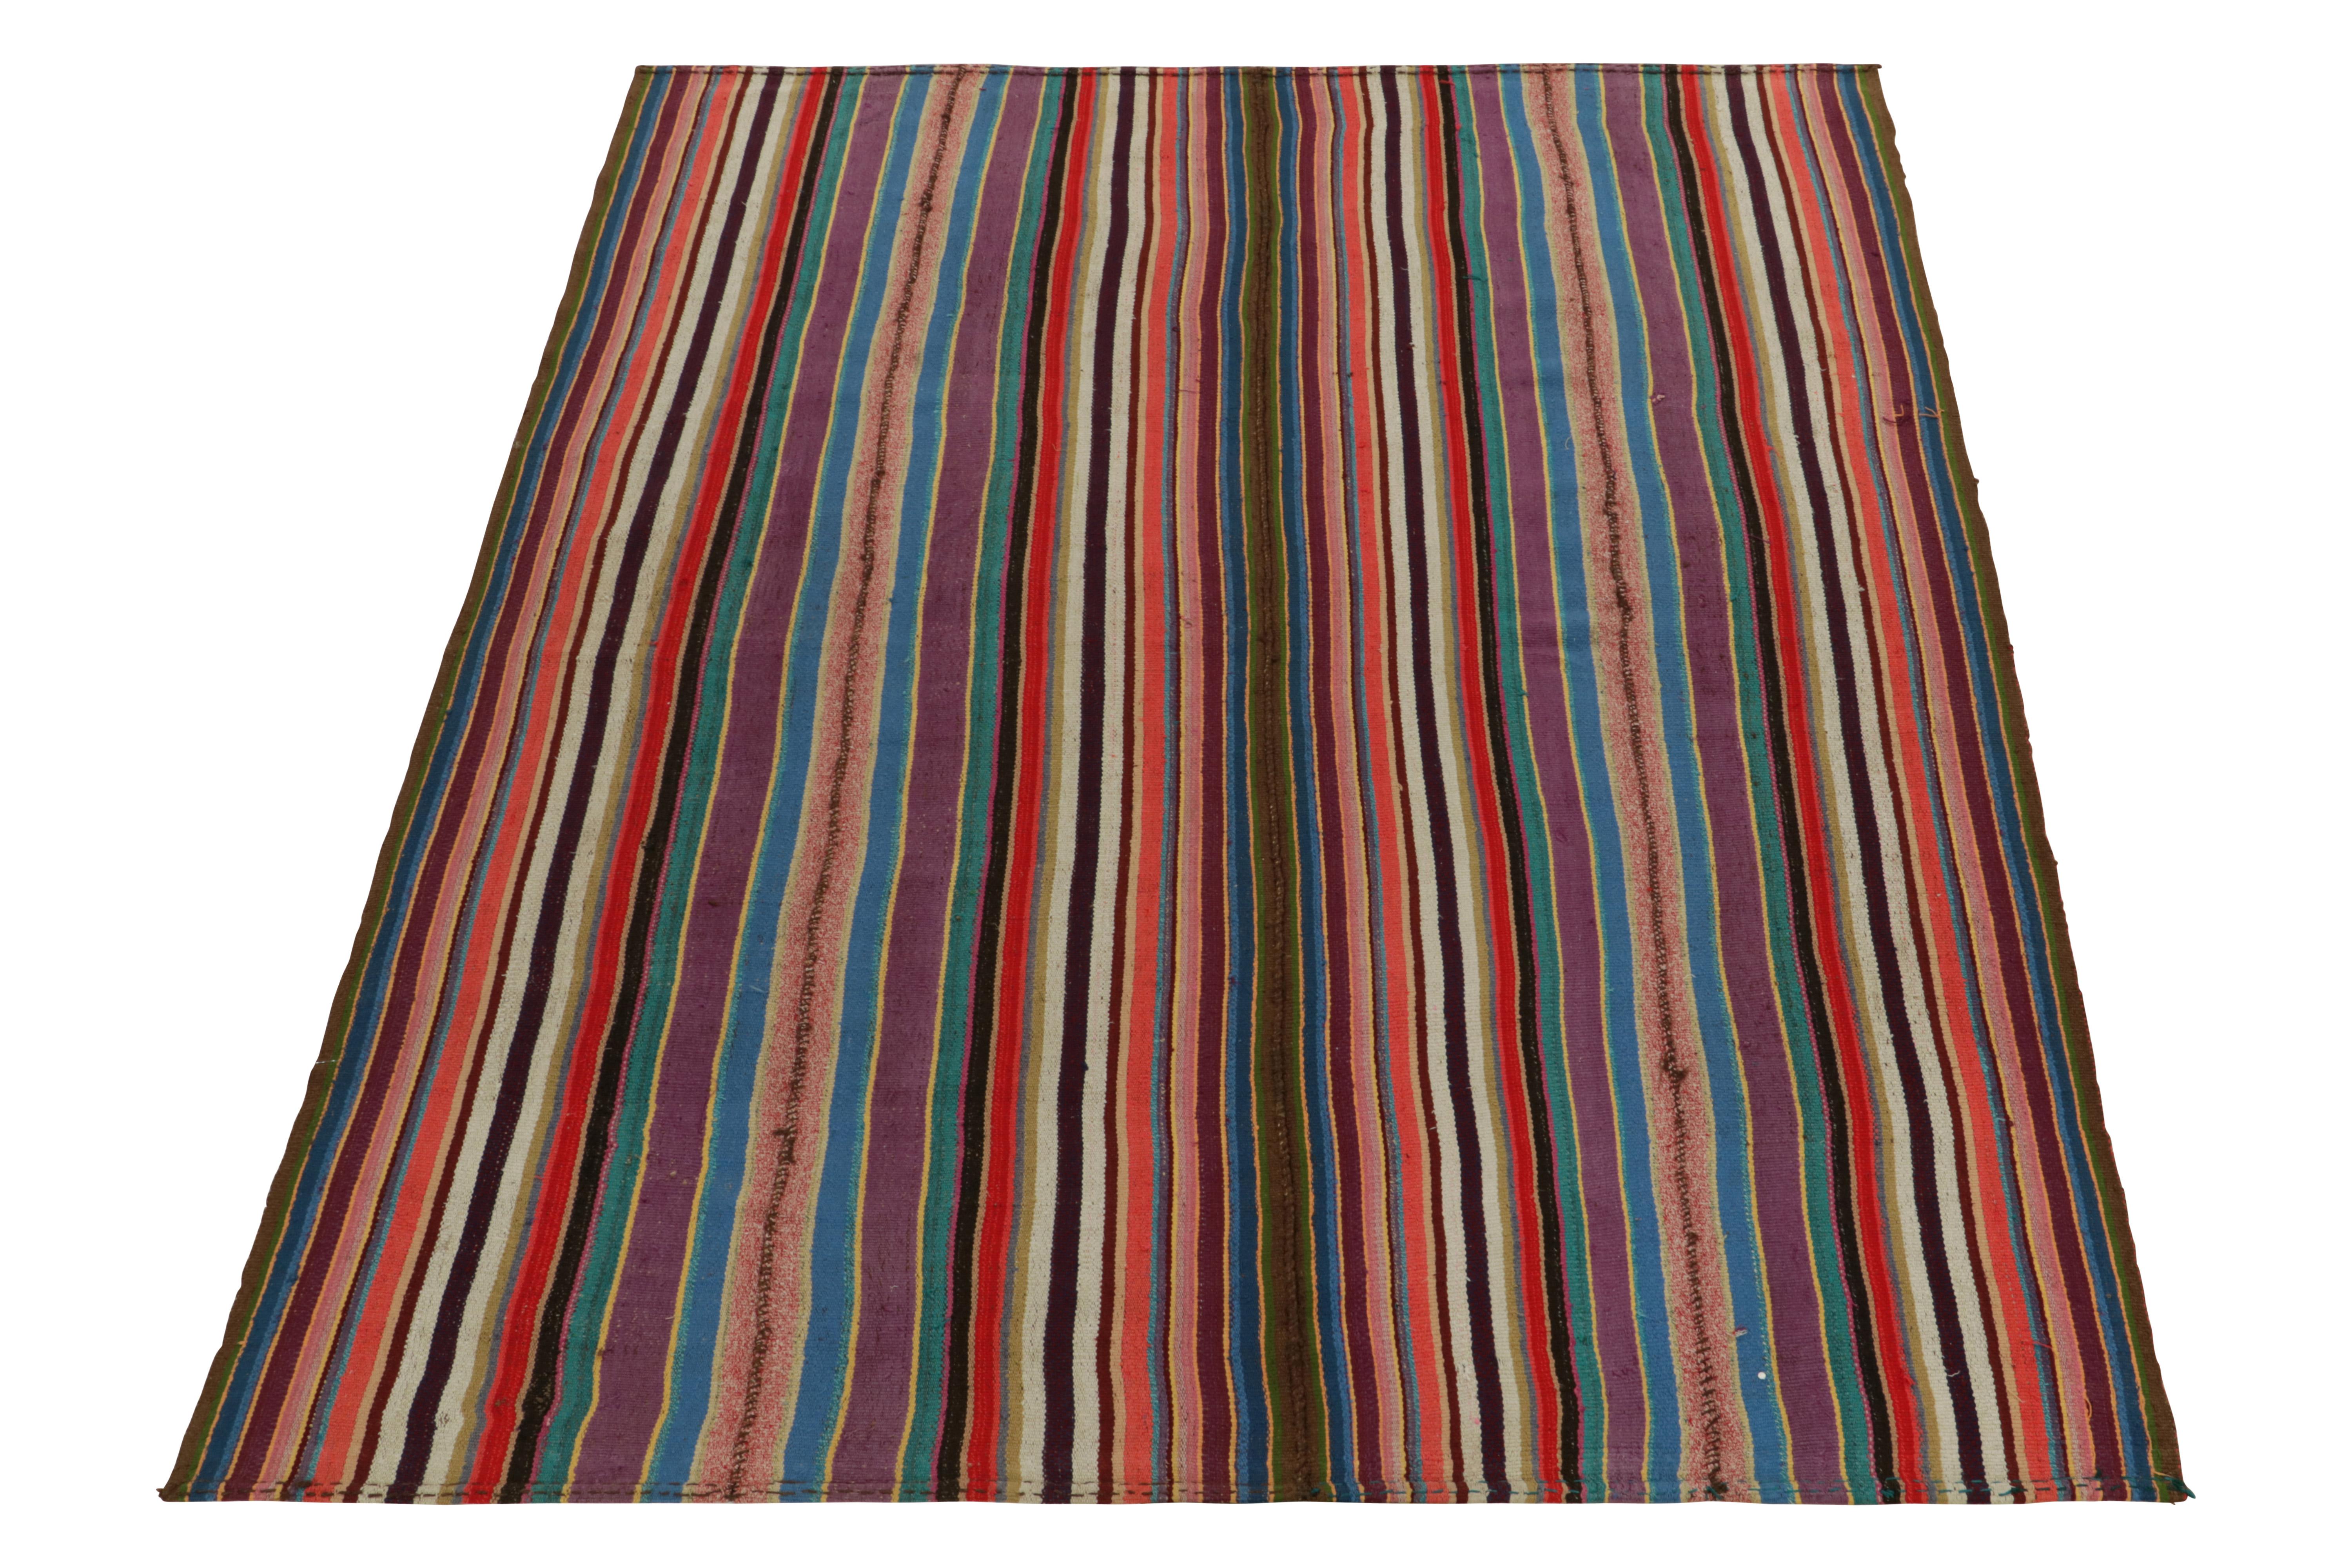 Originating from Turkey circa 1950-1960, a rare type of chaput kilim rug style now entering our Antique & Vintage selections. Characterized by fine detailing with the colors within the polychromatic stripes, the psychedelic piece welcomes a